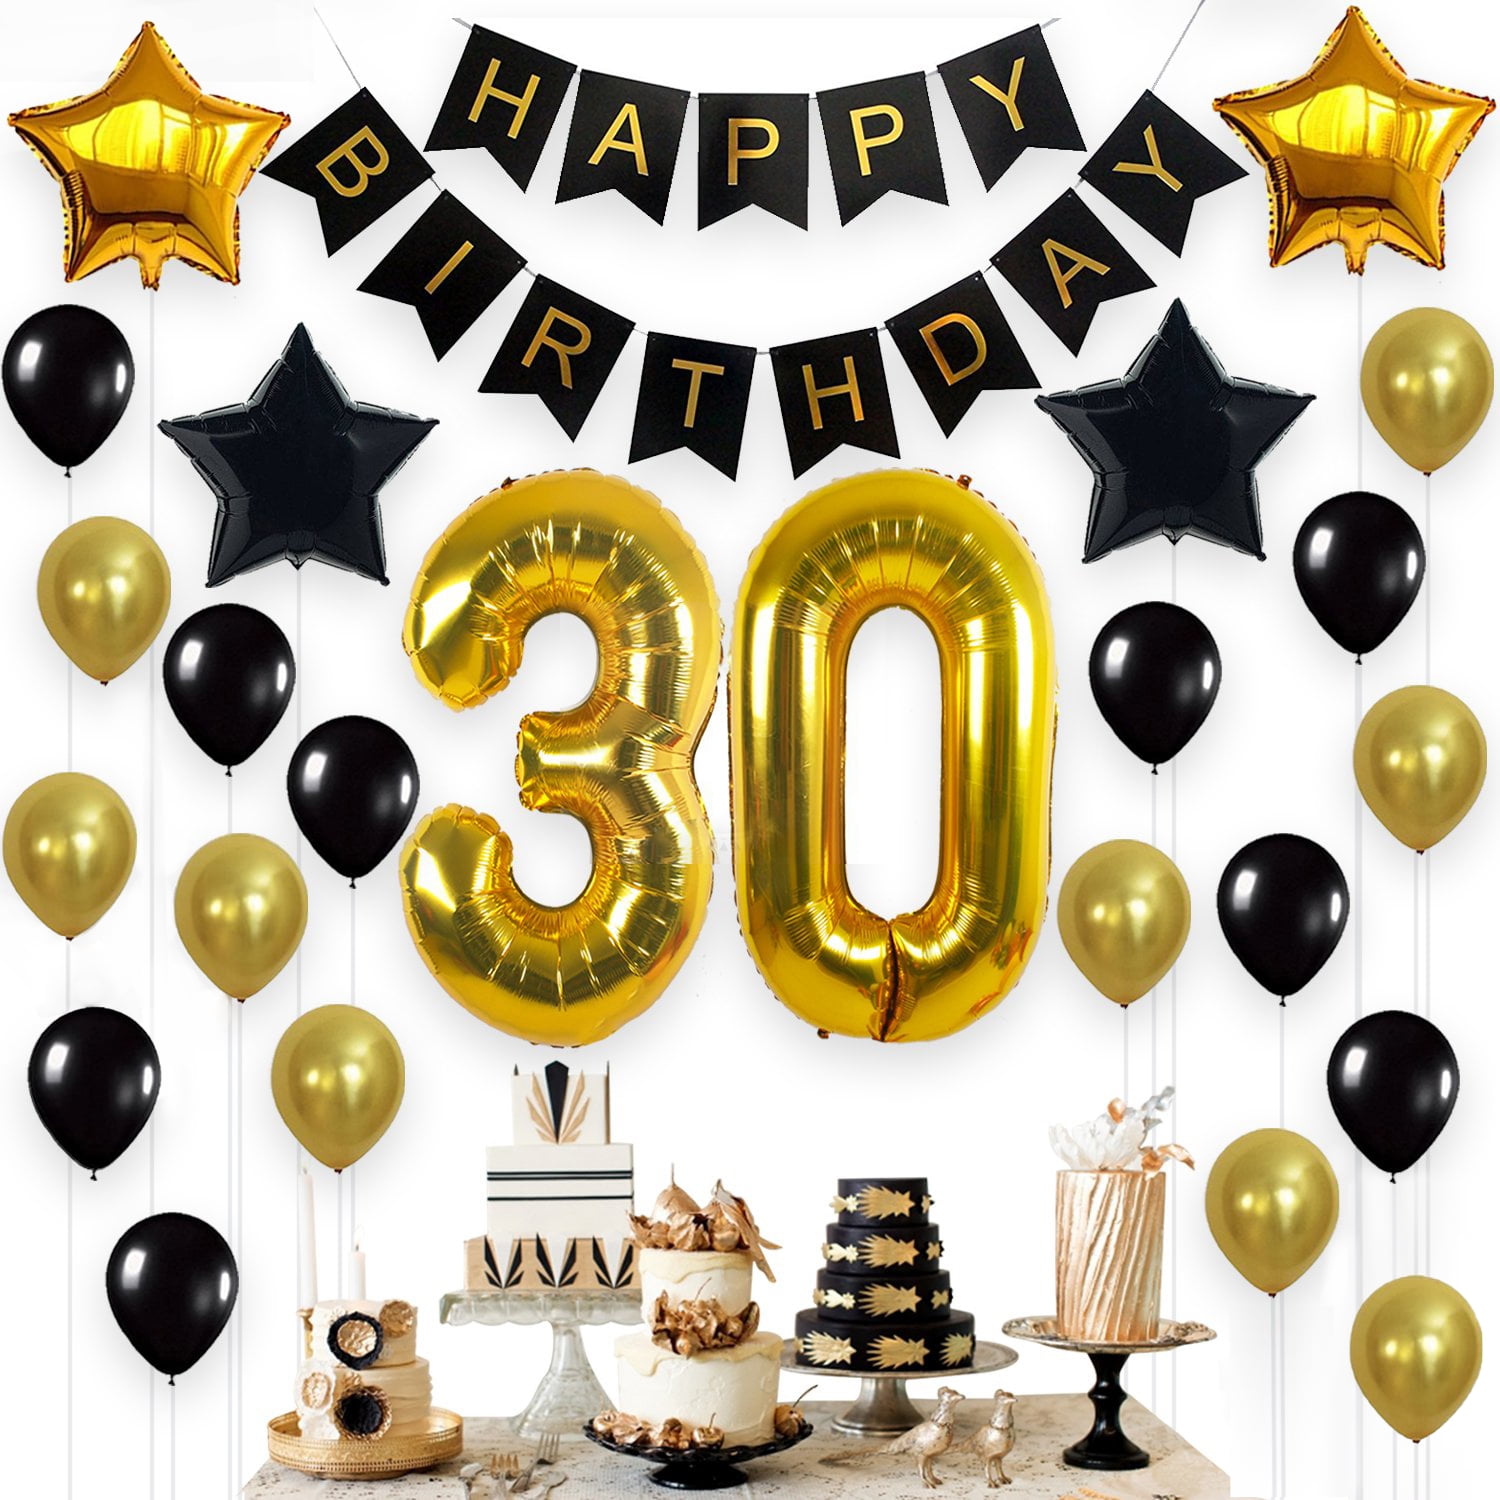 SIJIE 30th Birthday Decorations 30 Gold Number Balloons Happy Birthday Banner Birthday Balloons for Black and Gold 30th Birthday Party Supplies